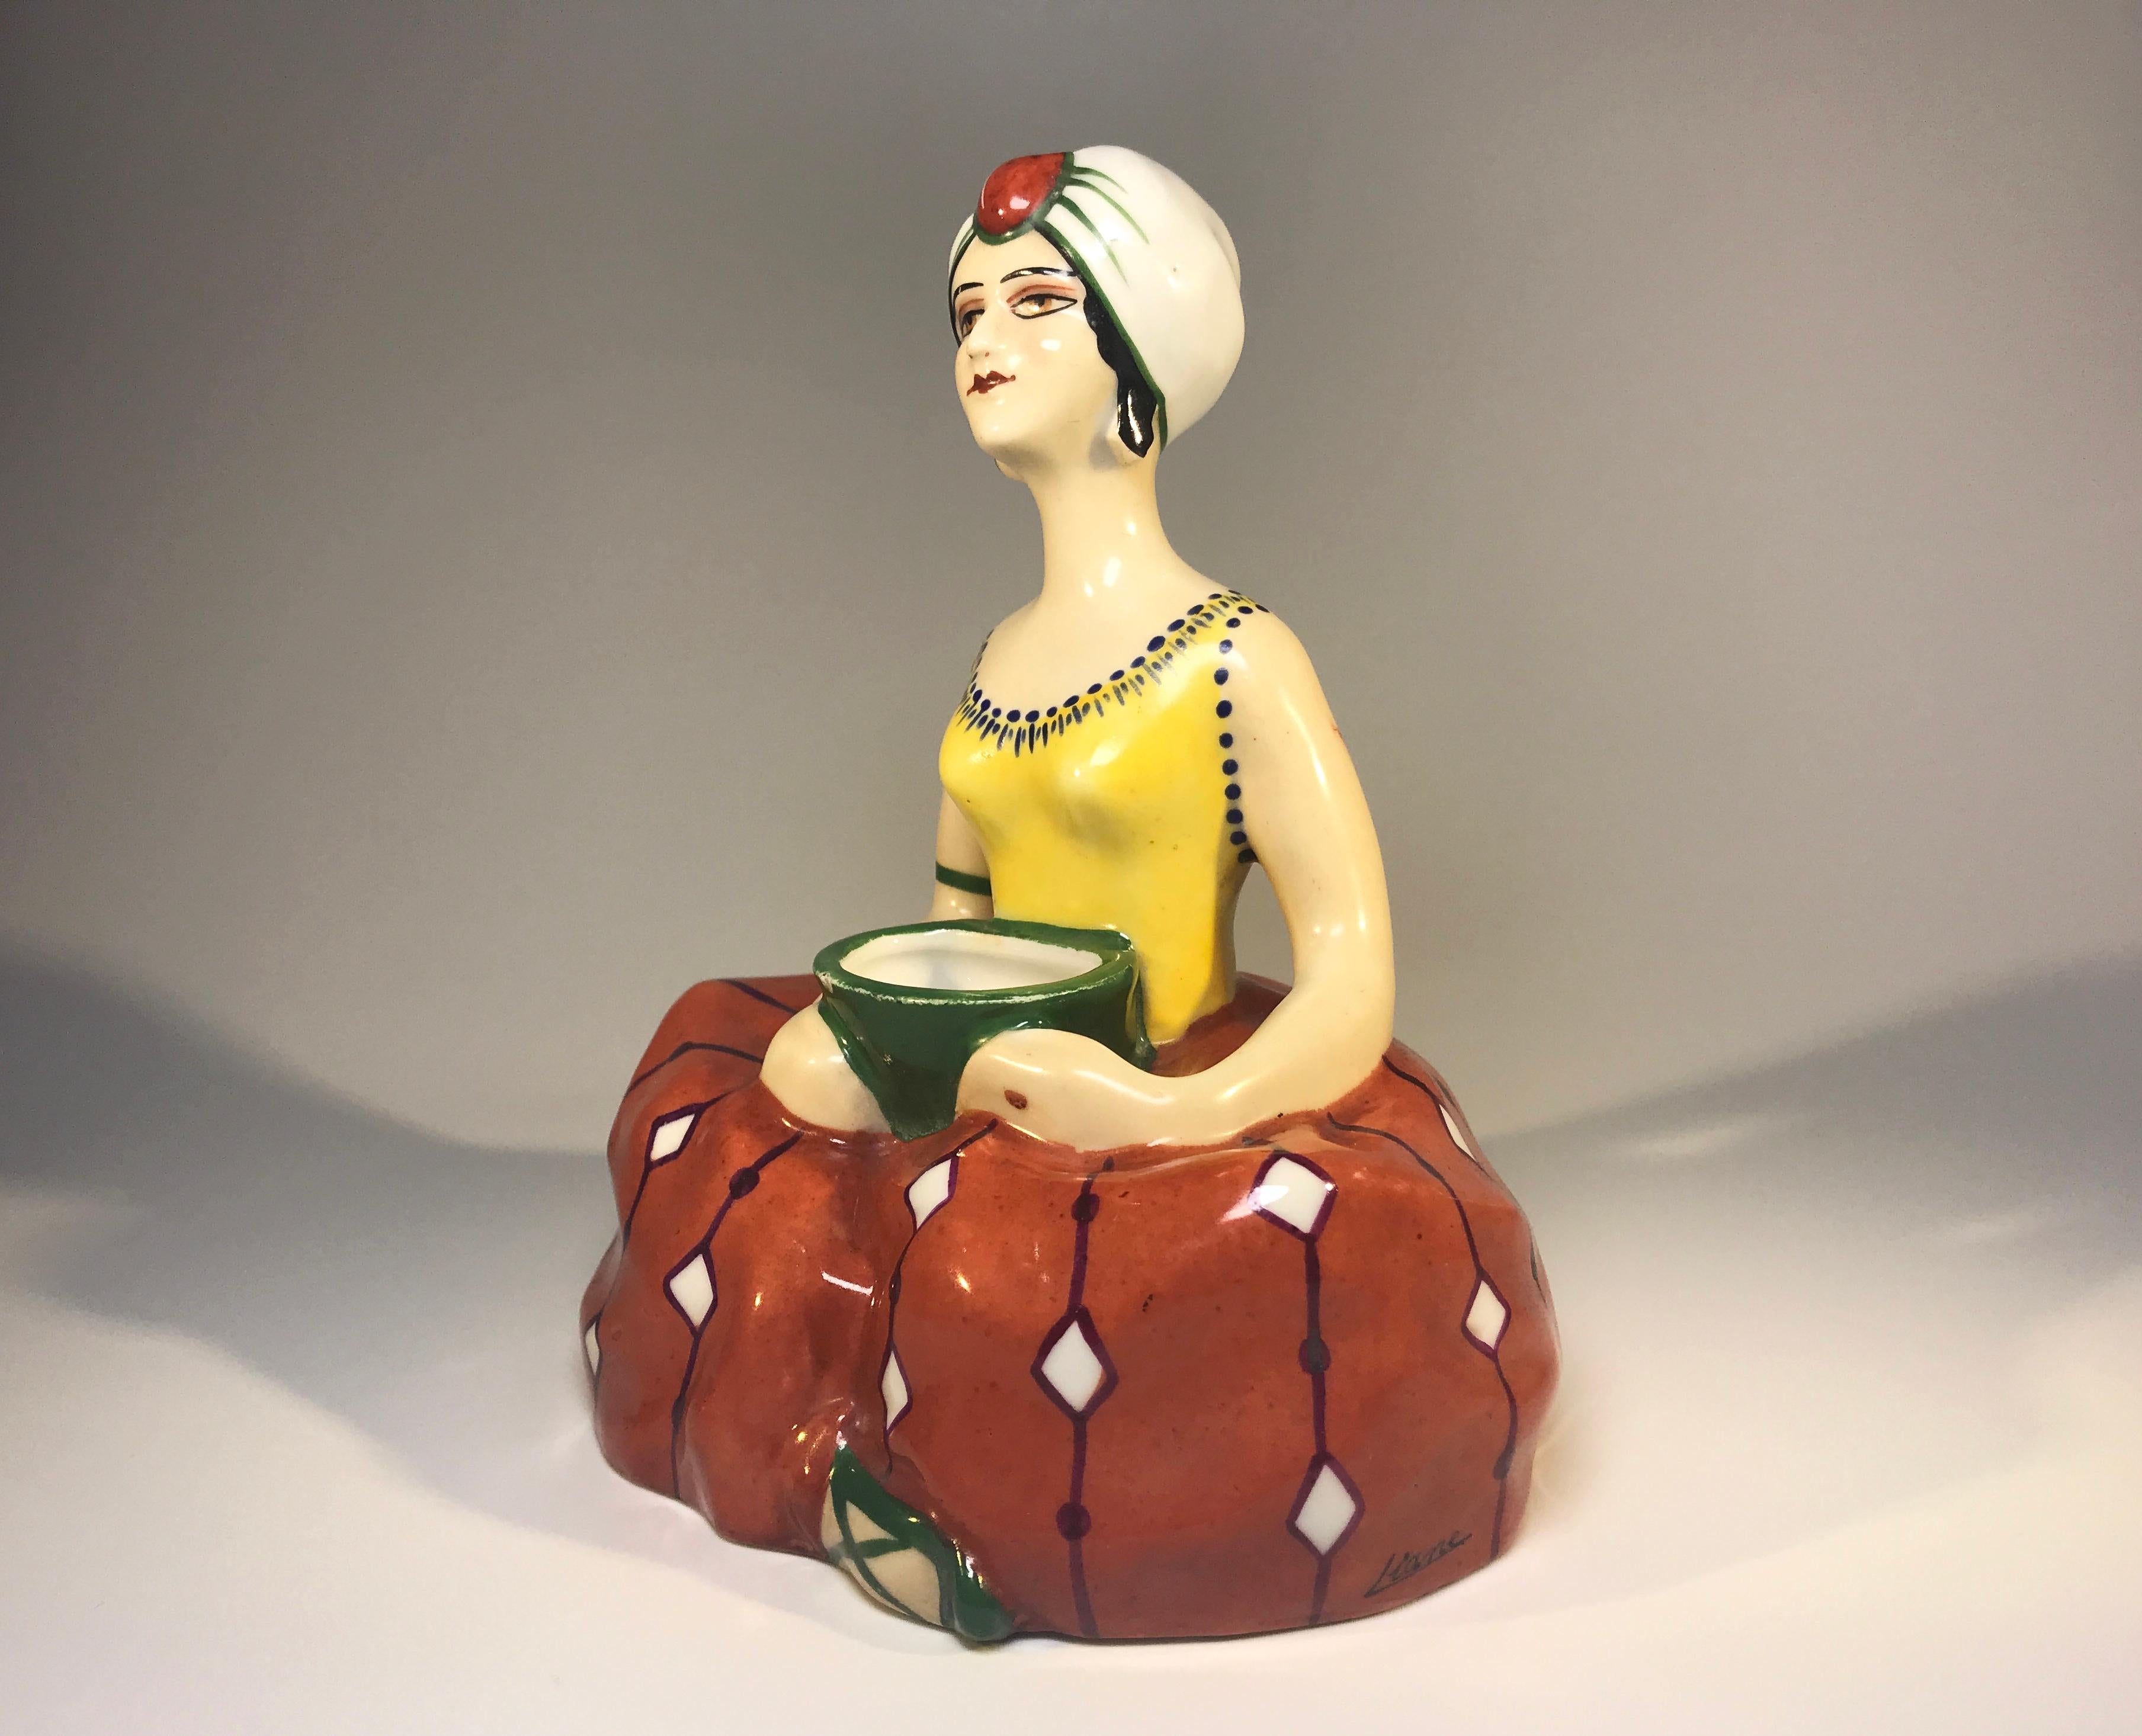 Art Deco enigmatic figural ceramic inkwell by Henri Delcourt of Boulogne-sur-Mer, France
Dressed in dark tangerine and yellow, this turban wearing lady has an air of exotica to her
Undoubtedly Henri Delcourt was one of the greatest names of Art